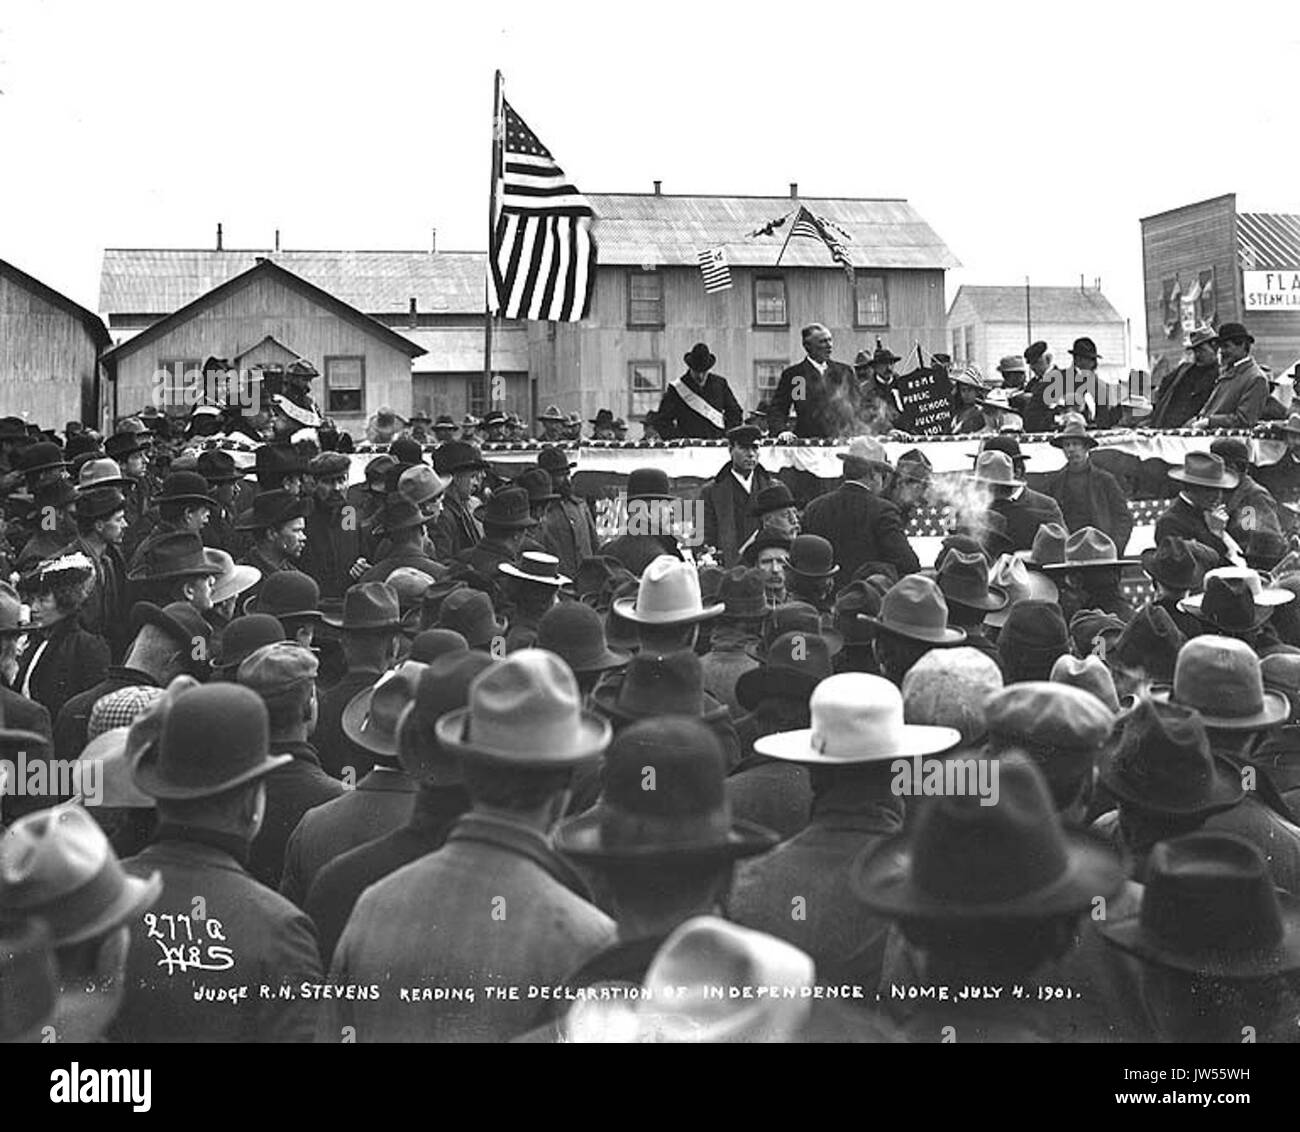 Judge RN Stevens reading the Declaration of Independence to a crowd during the July 4th celebration, Nome, Alaska, 1901 (HEGG 407) Stock Photo